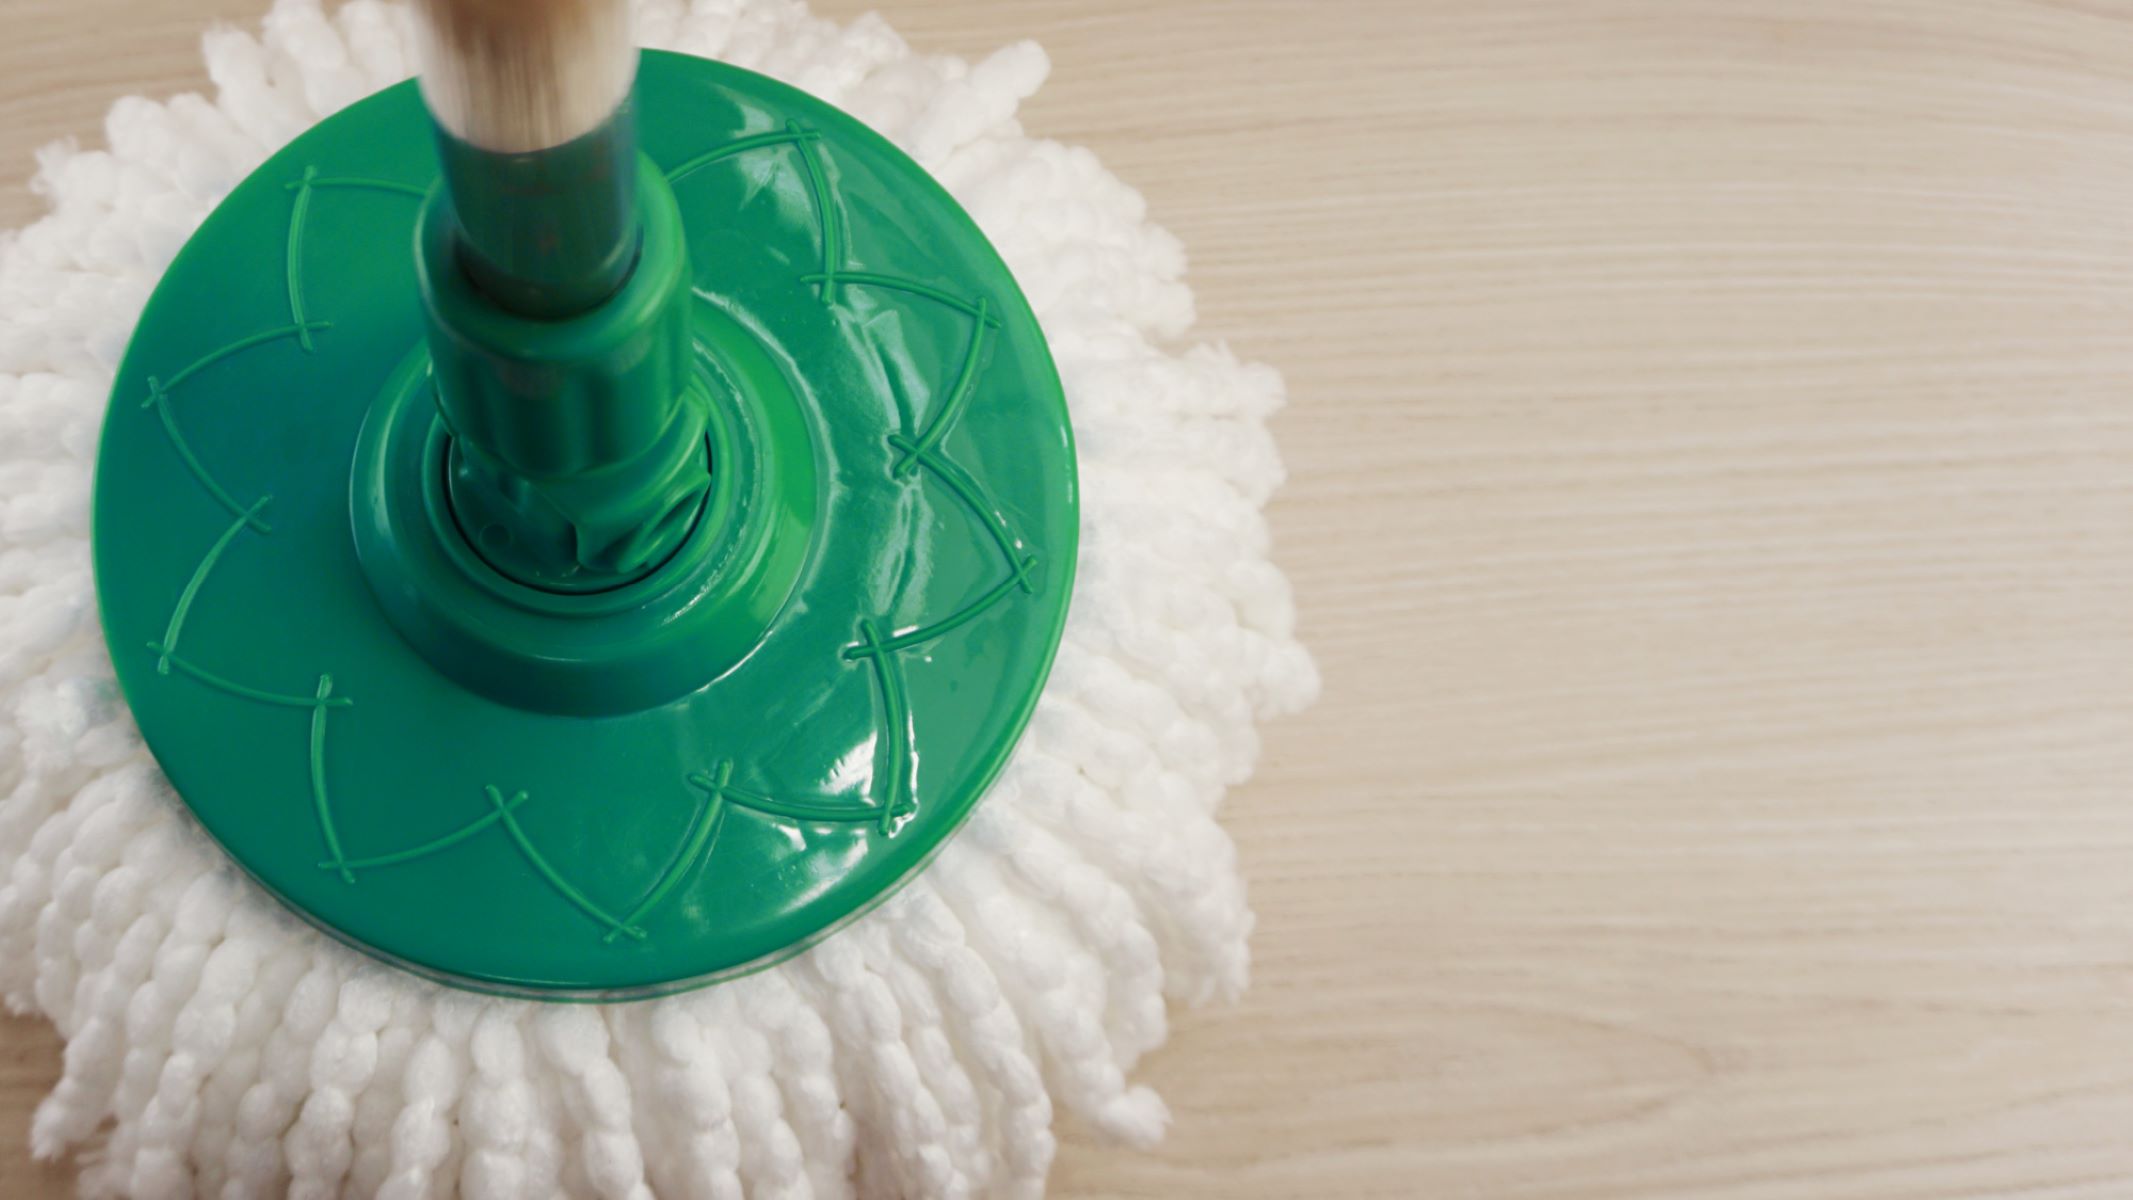 How To Change Mop Head On Spin Mop